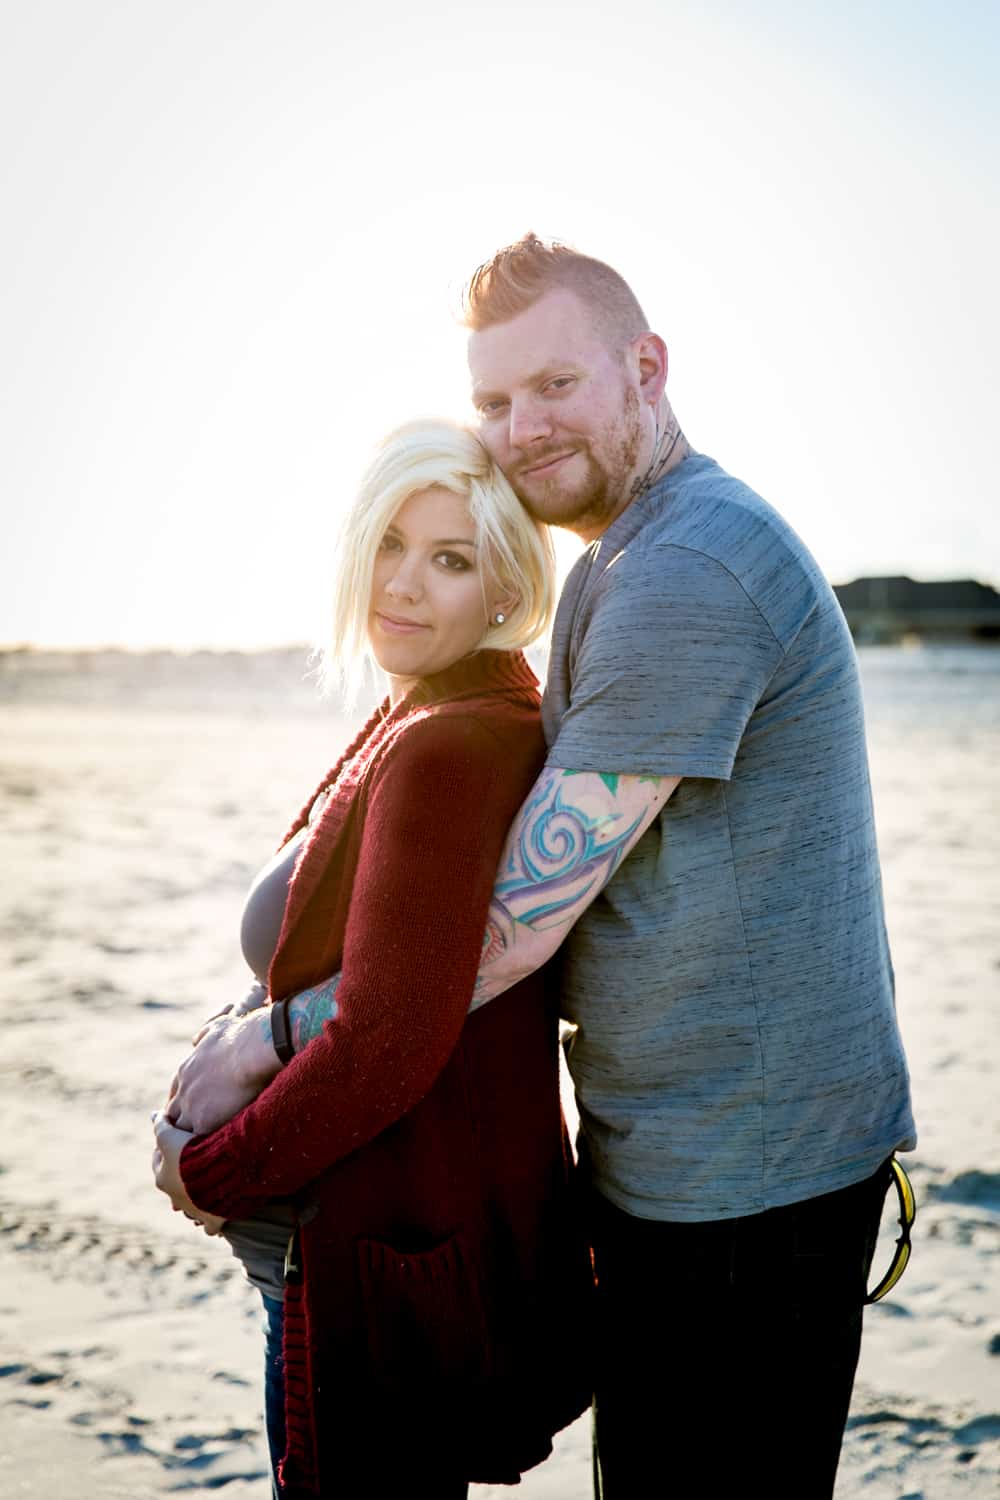 Pregnant blond woman and partner on beach for an article on how to prepare for a maternity photo shoot